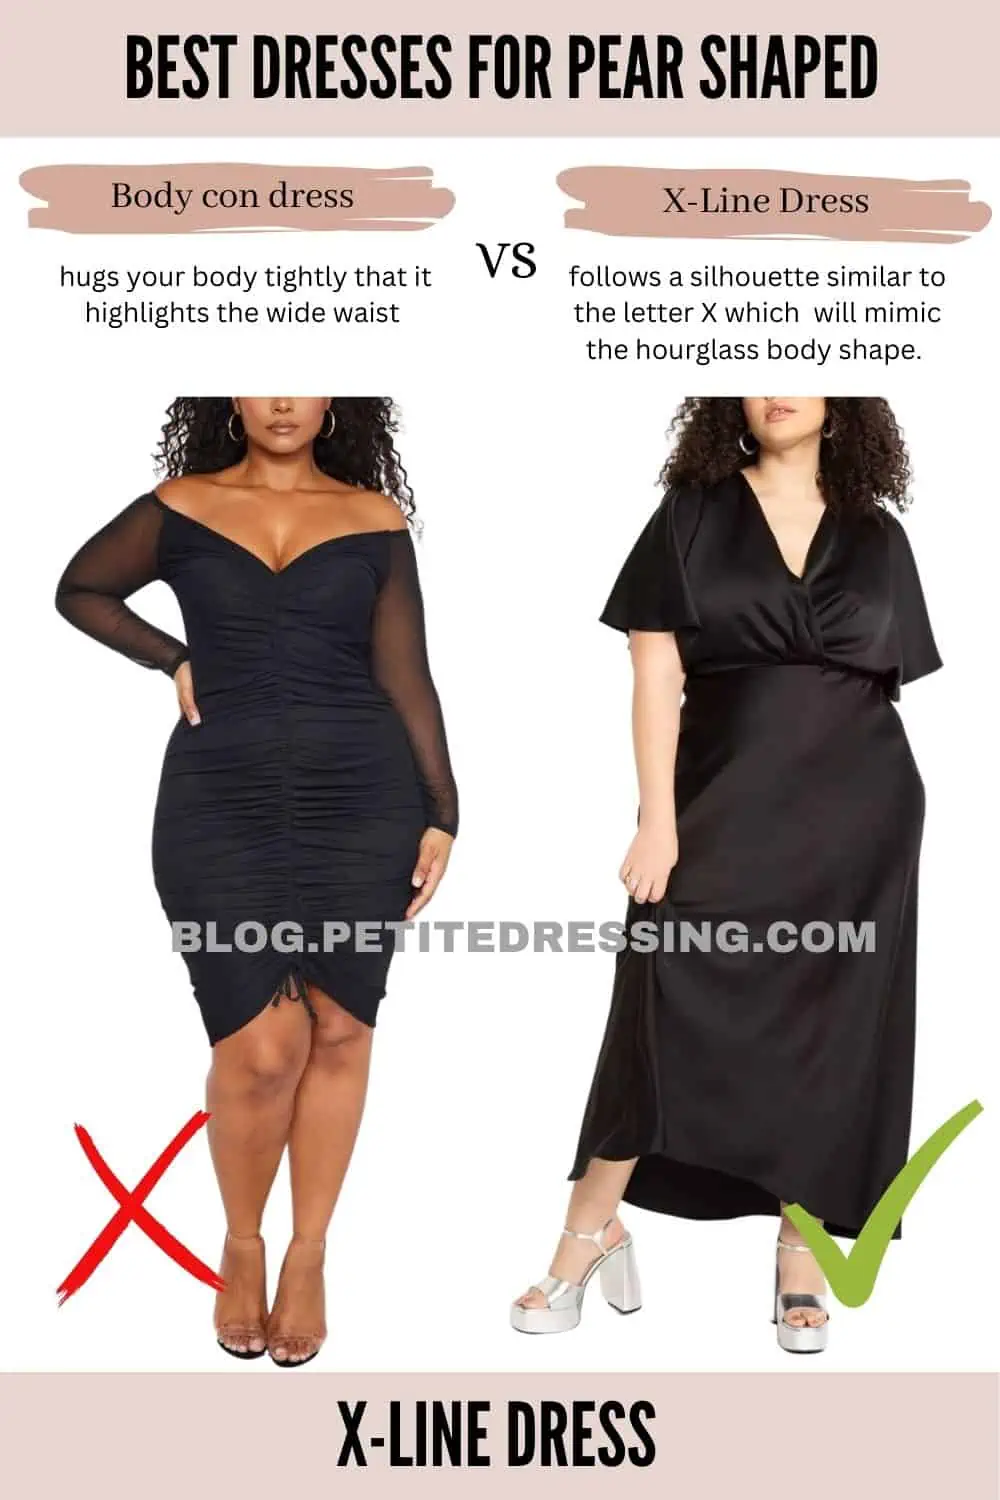 What are the best dresses for a pear shape? | Stitch Fix Style